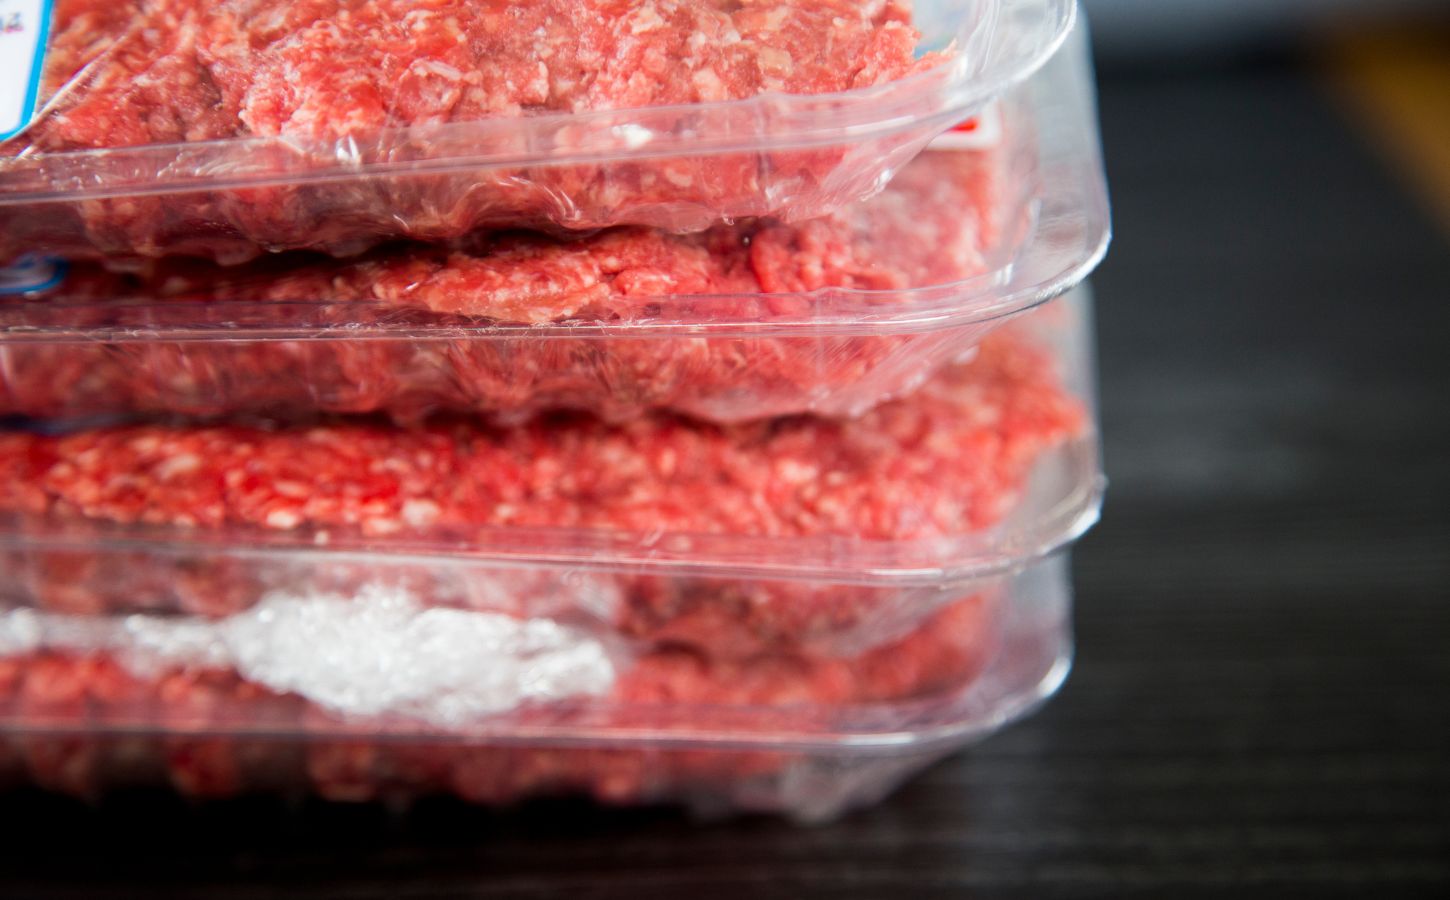 Packaged raw ground beef